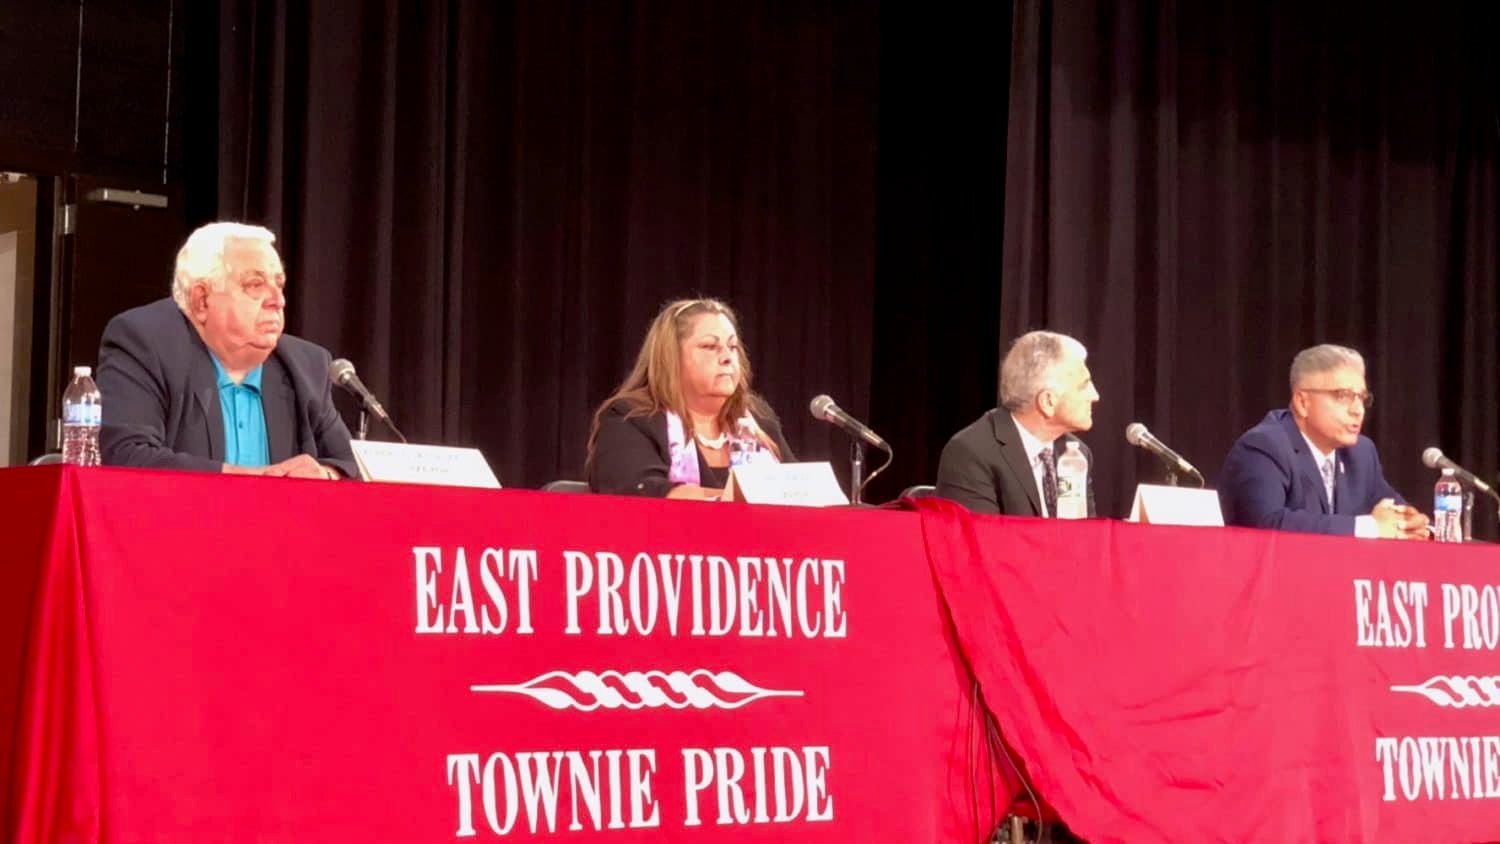 Video from the East Providence Mayoral Forum